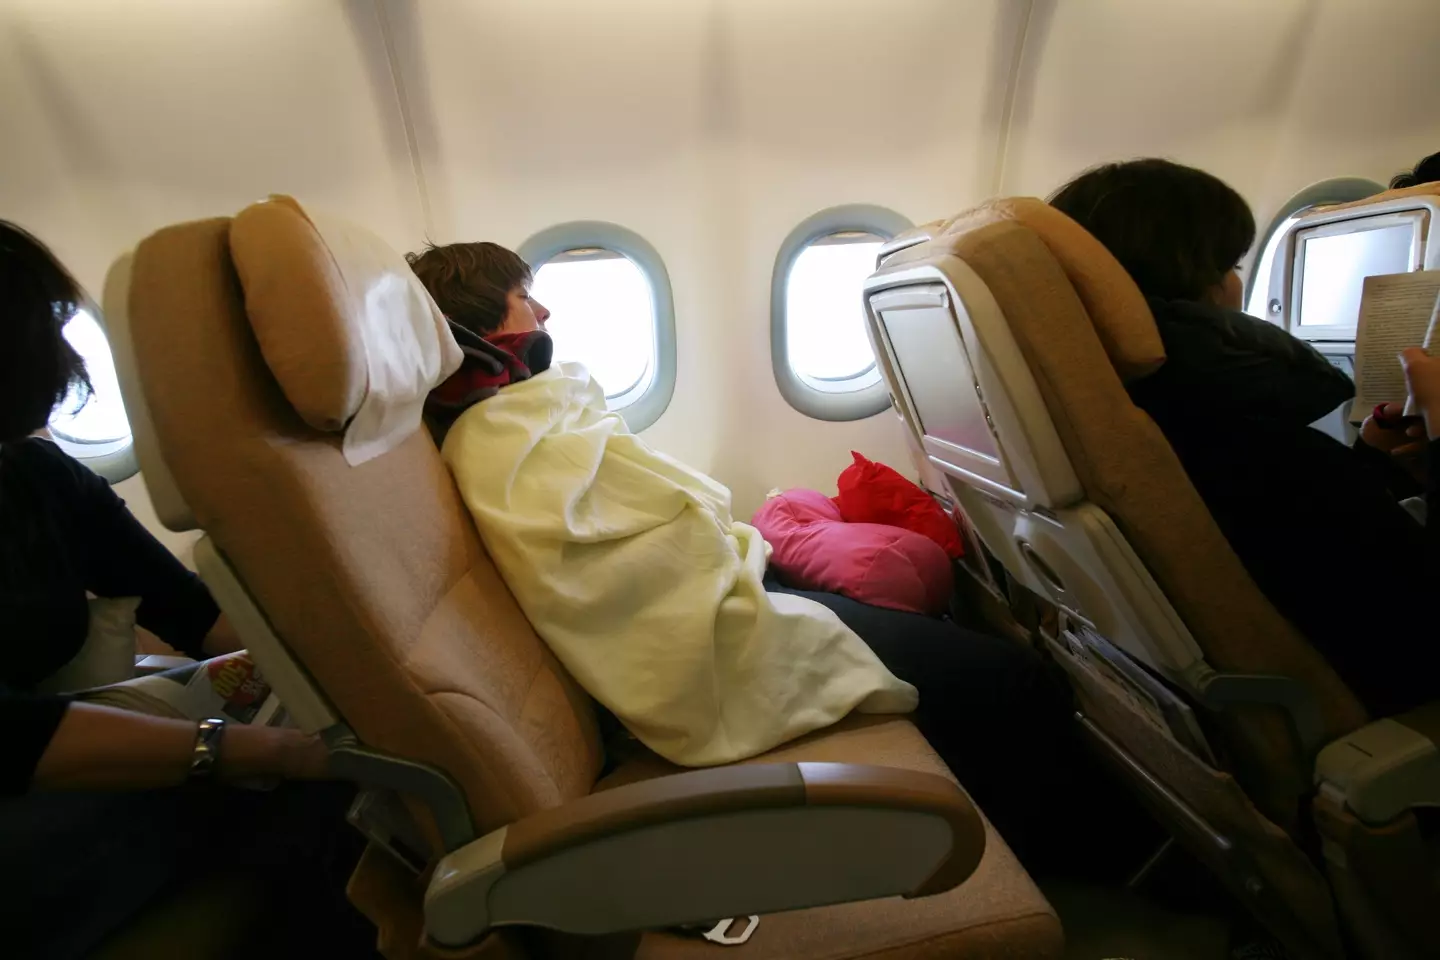 The woman called people who recline their seats too far back on planes as 'inconsiderate'.